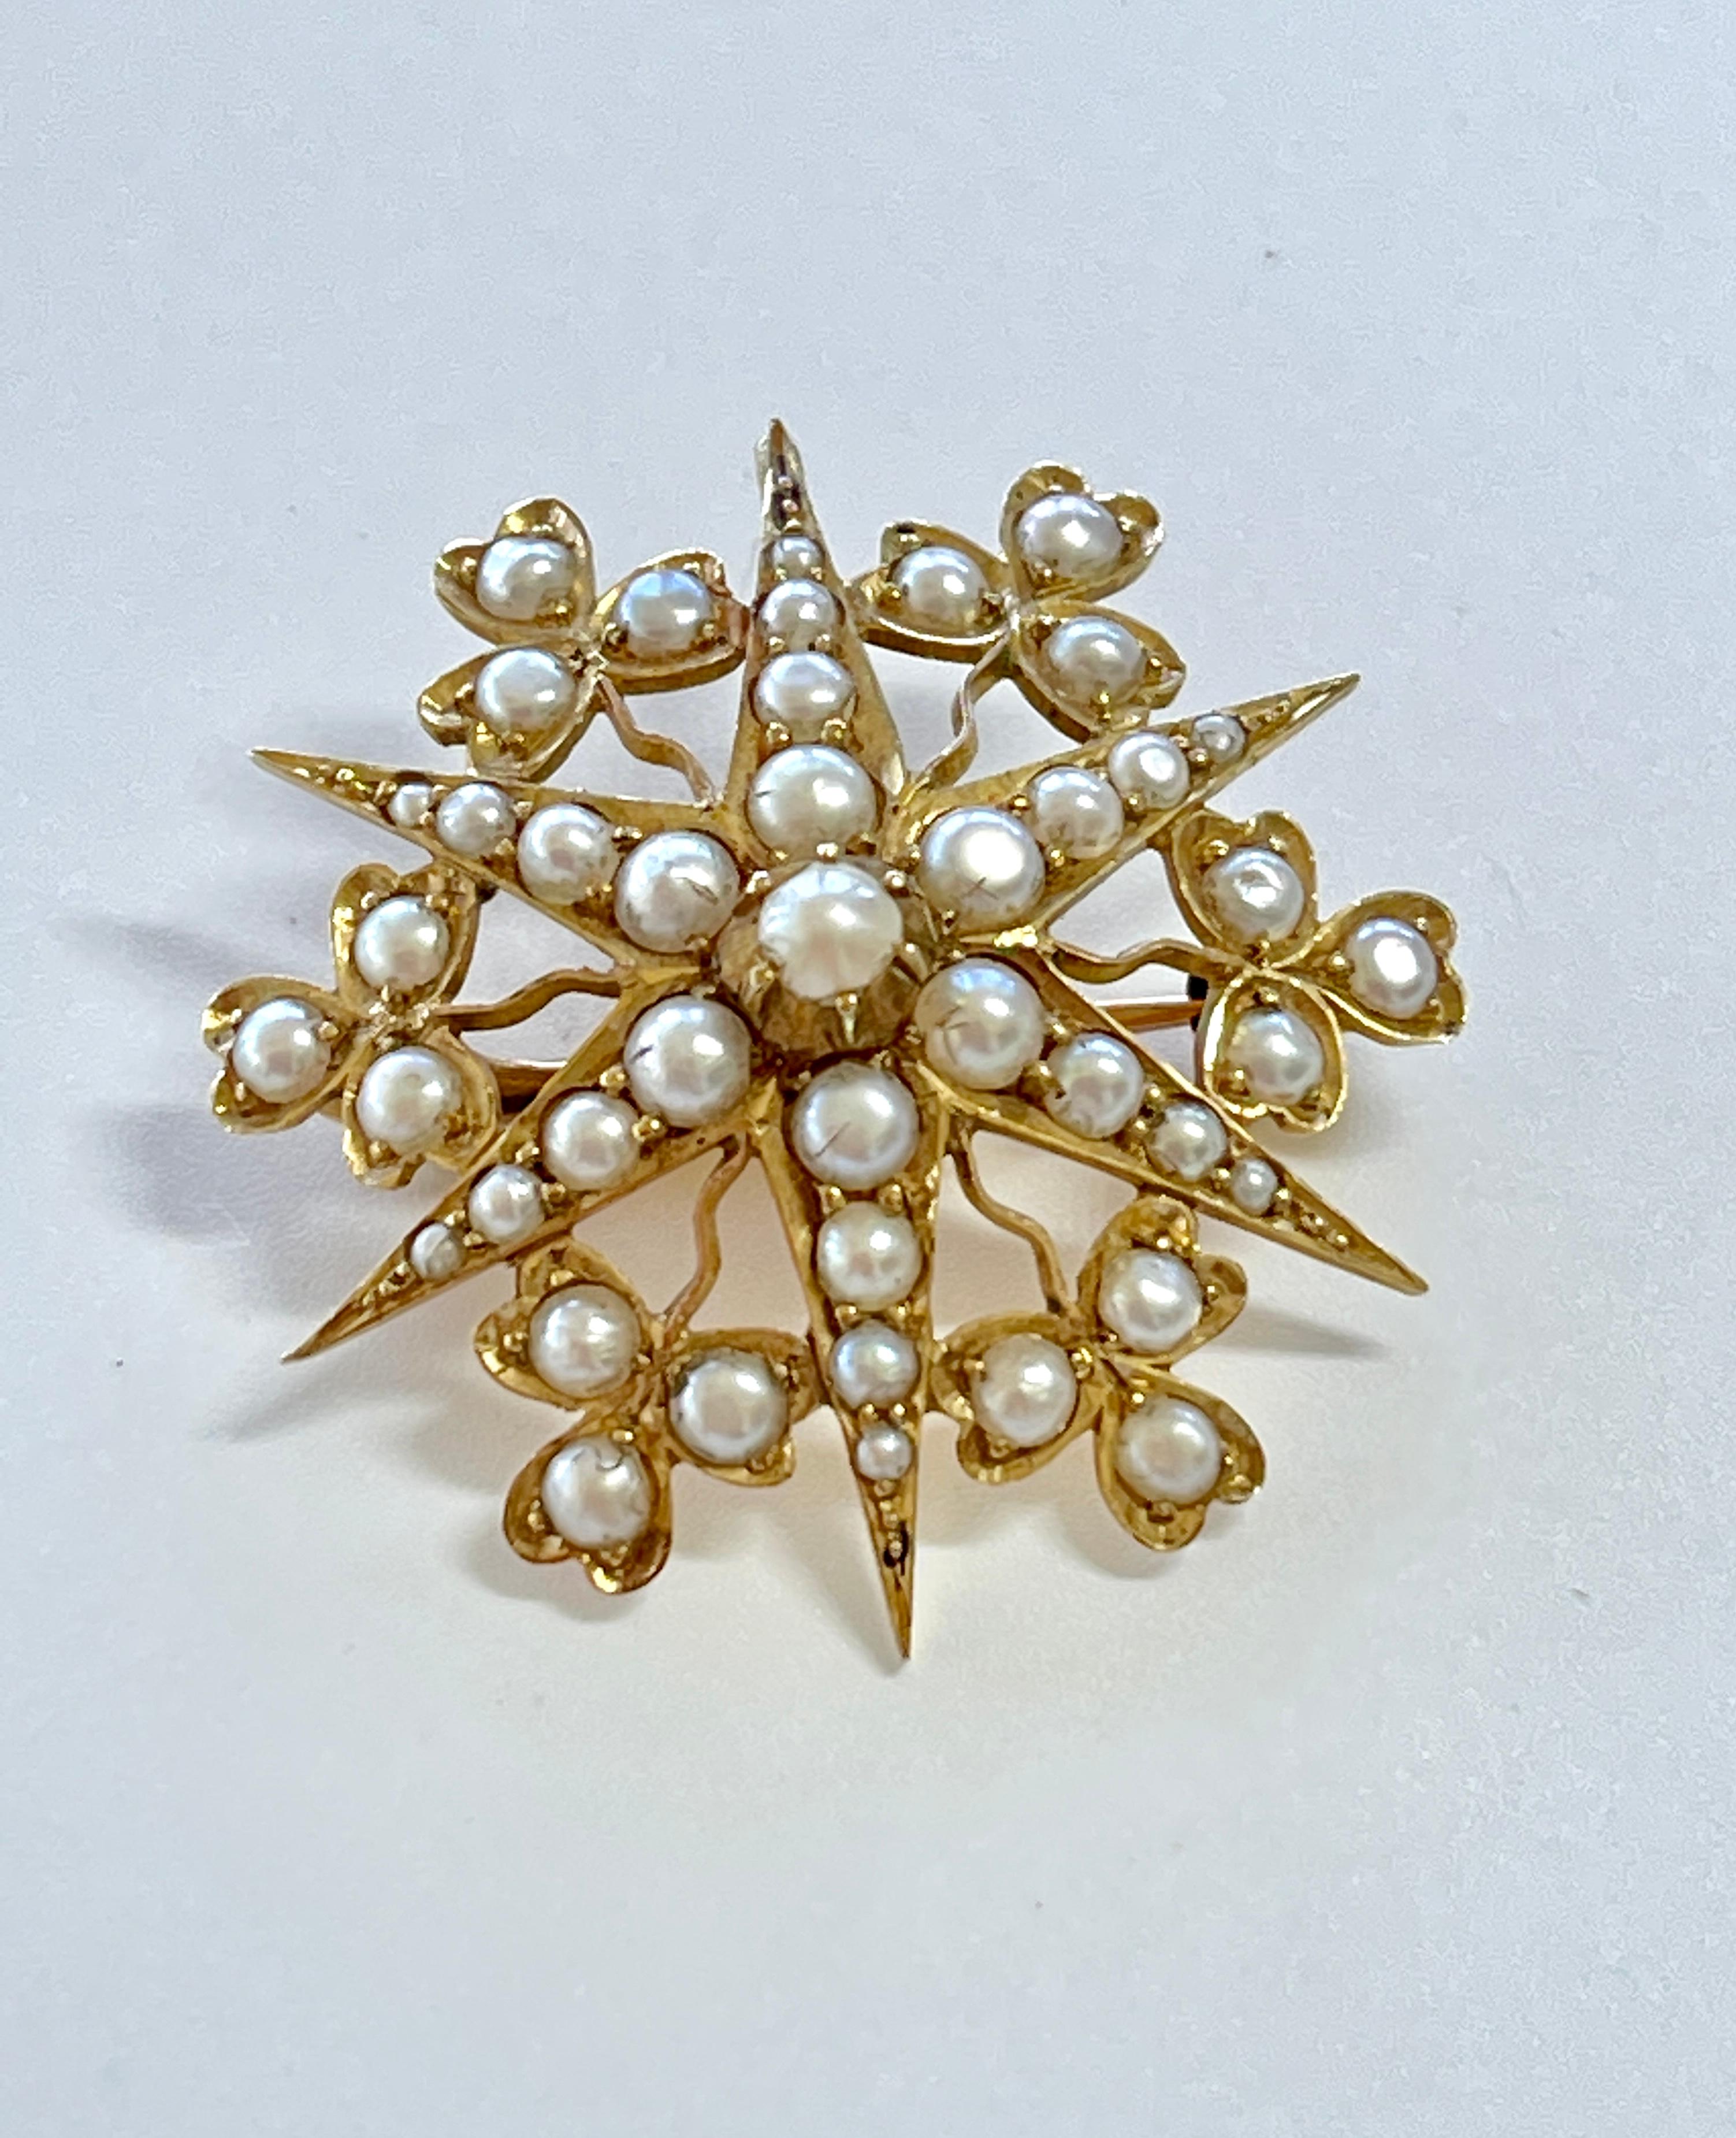 This gorgeous brooch will grab your heart!

c1905 it is a wonderful Edwardian piece that features split pearls, set in a star and hearts design.  The lustre of these pearls is extremely good and this makes the brooch quite eye catching.  
The piece